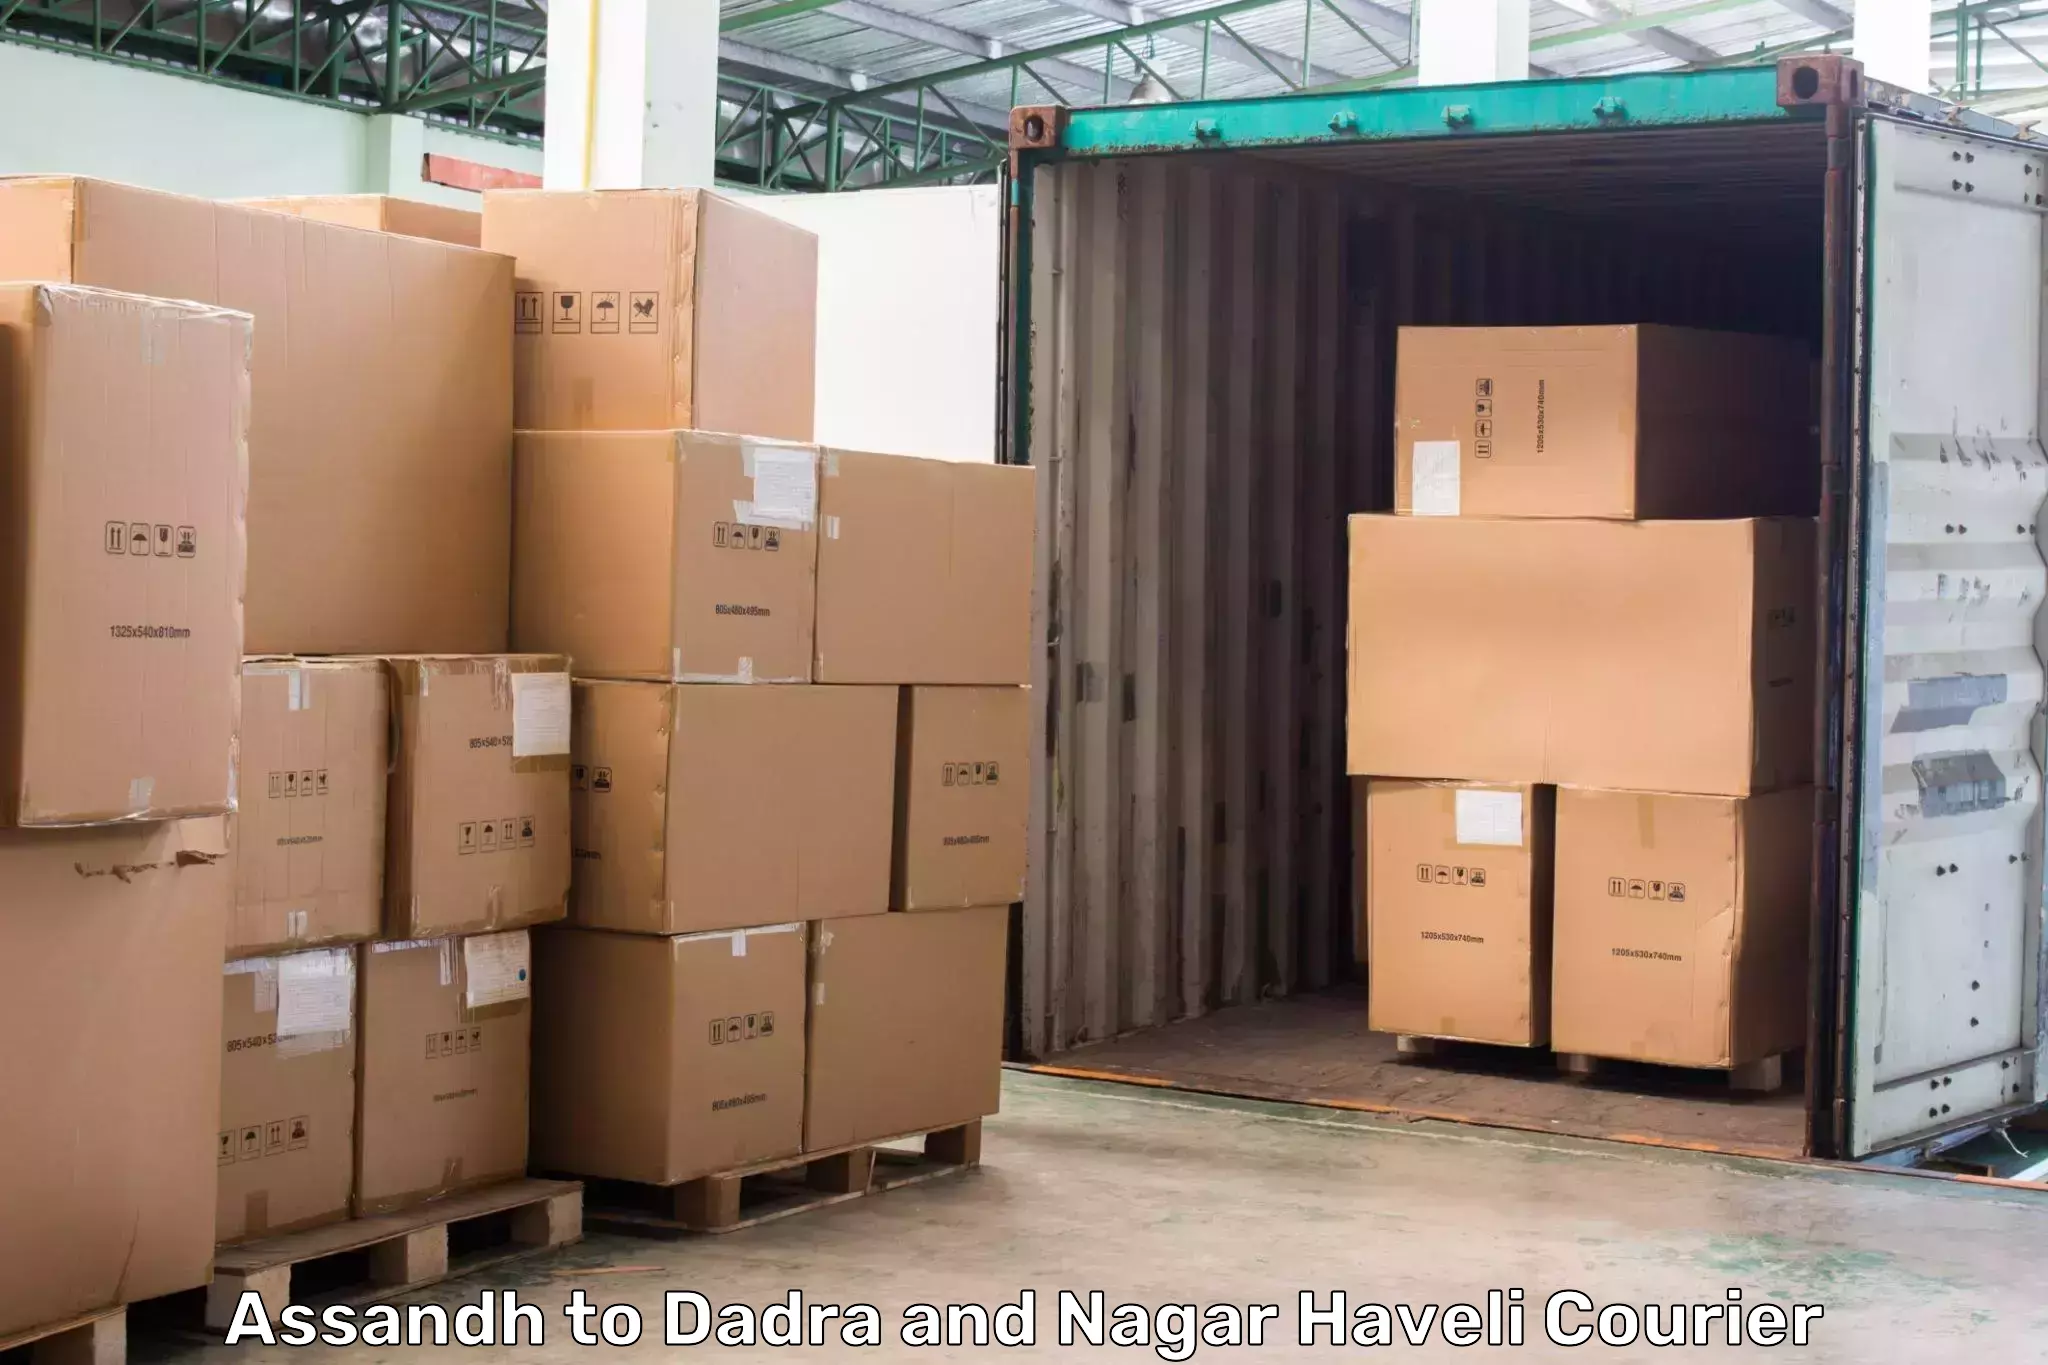 Courier service booking in Assandh to Dadra and Nagar Haveli